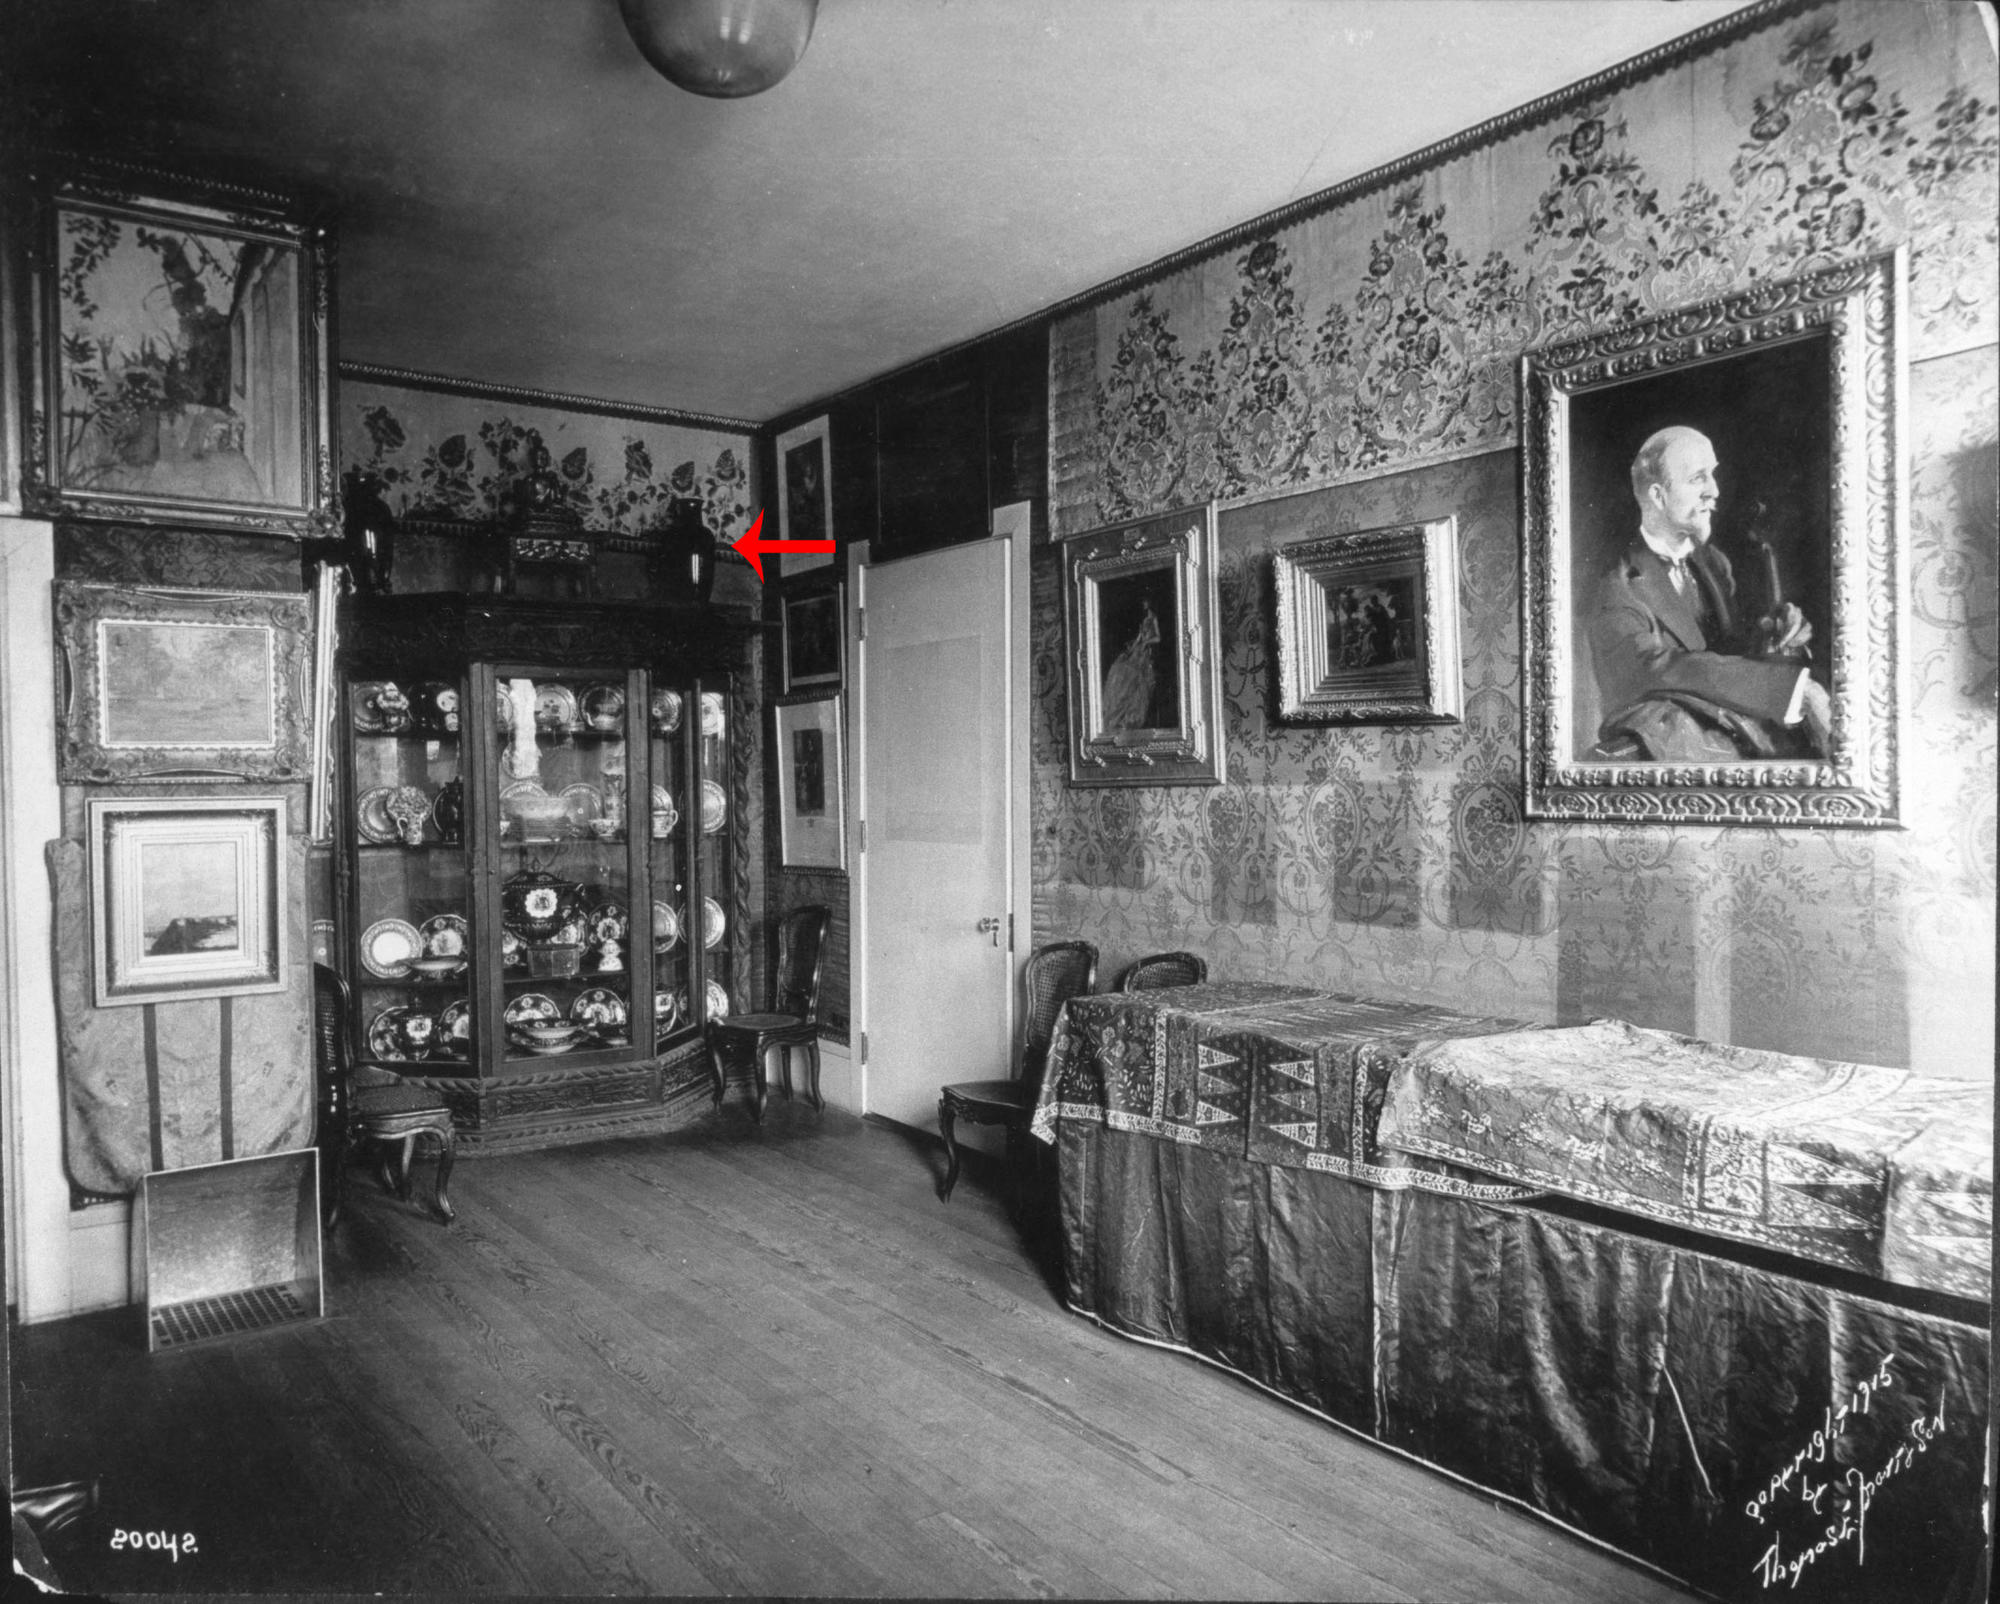 South Wall of the first floor Yellow Room in 1915 with a red arrow identifying the mirror-black glazed vase.